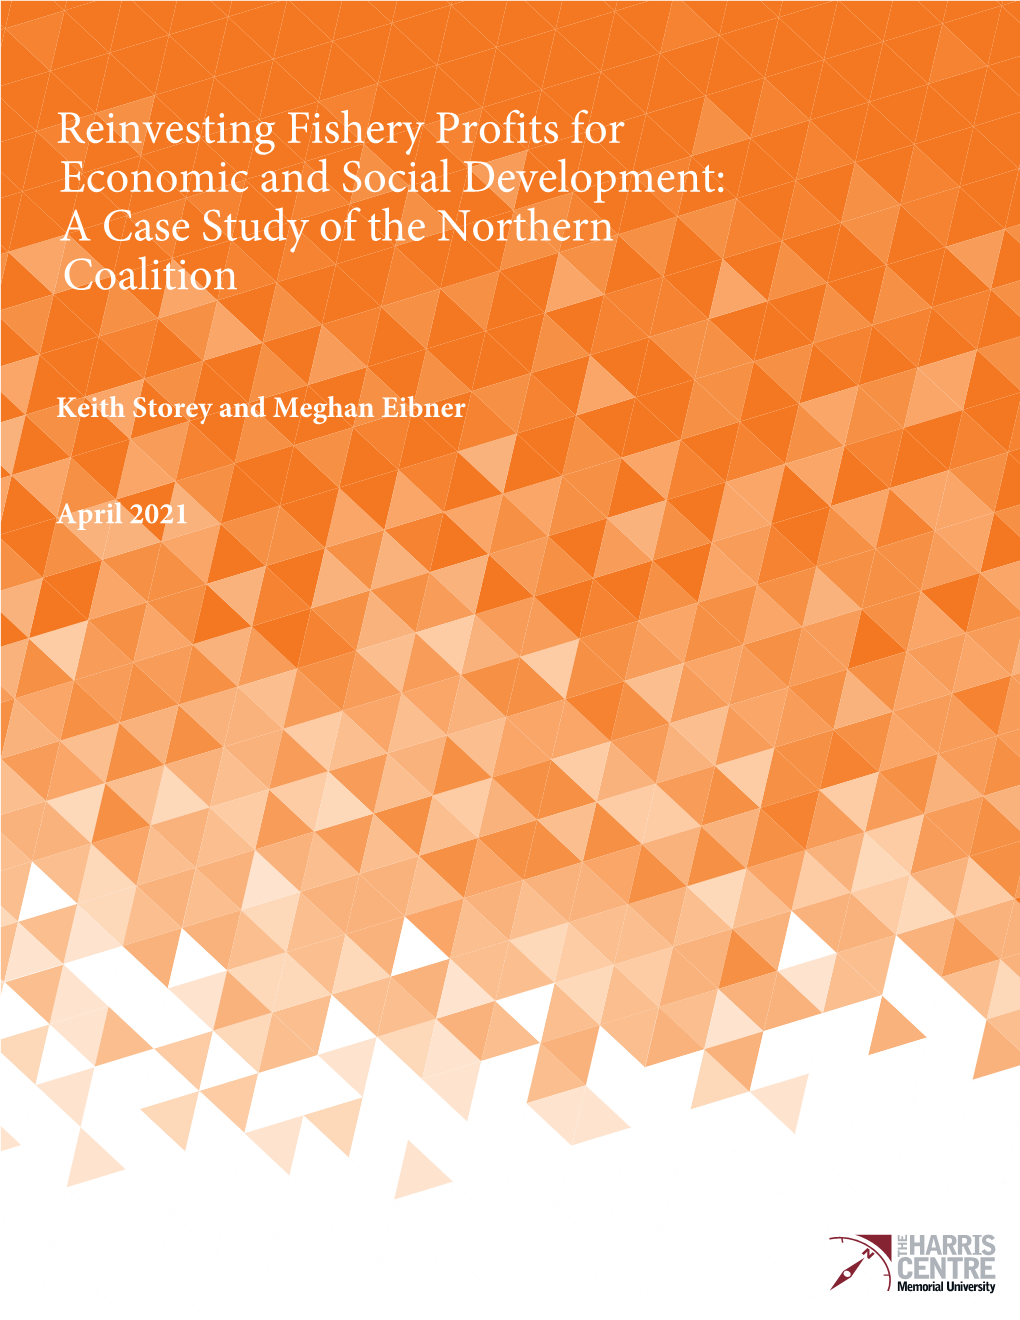 Reinvesting Fishery Profits for Economic and Social Development: a Case Study of the Northern Coalition